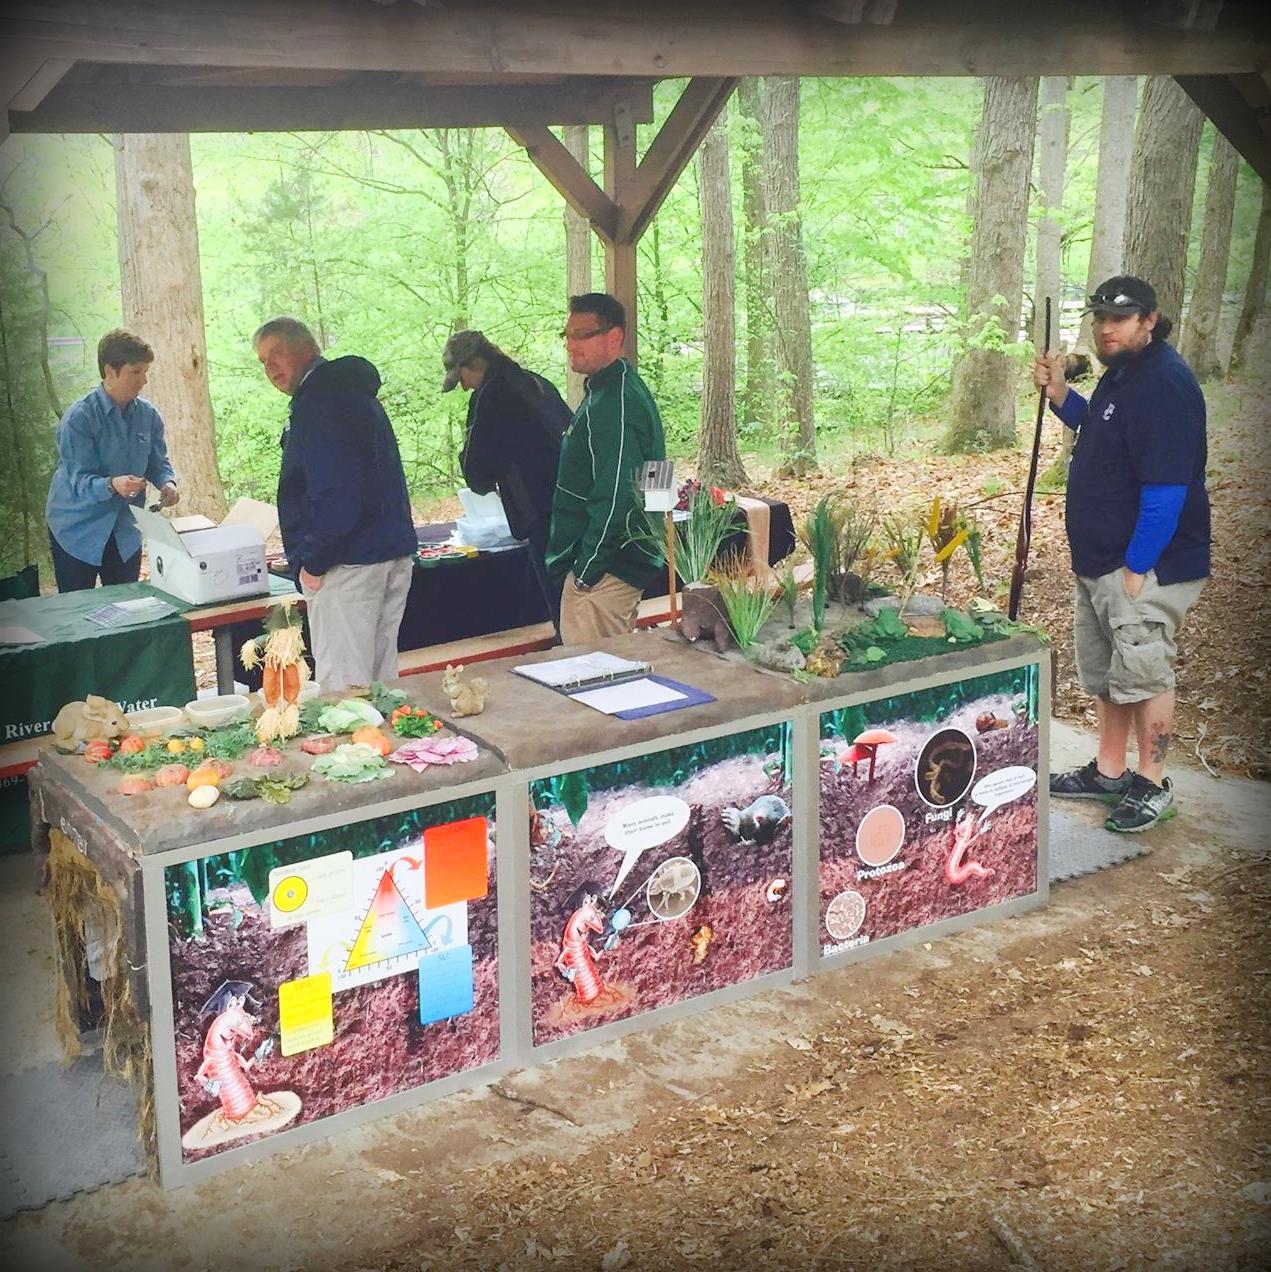 Gardening, soil conservation and native plant demonstrations were enjoyed by RiverFest participants.